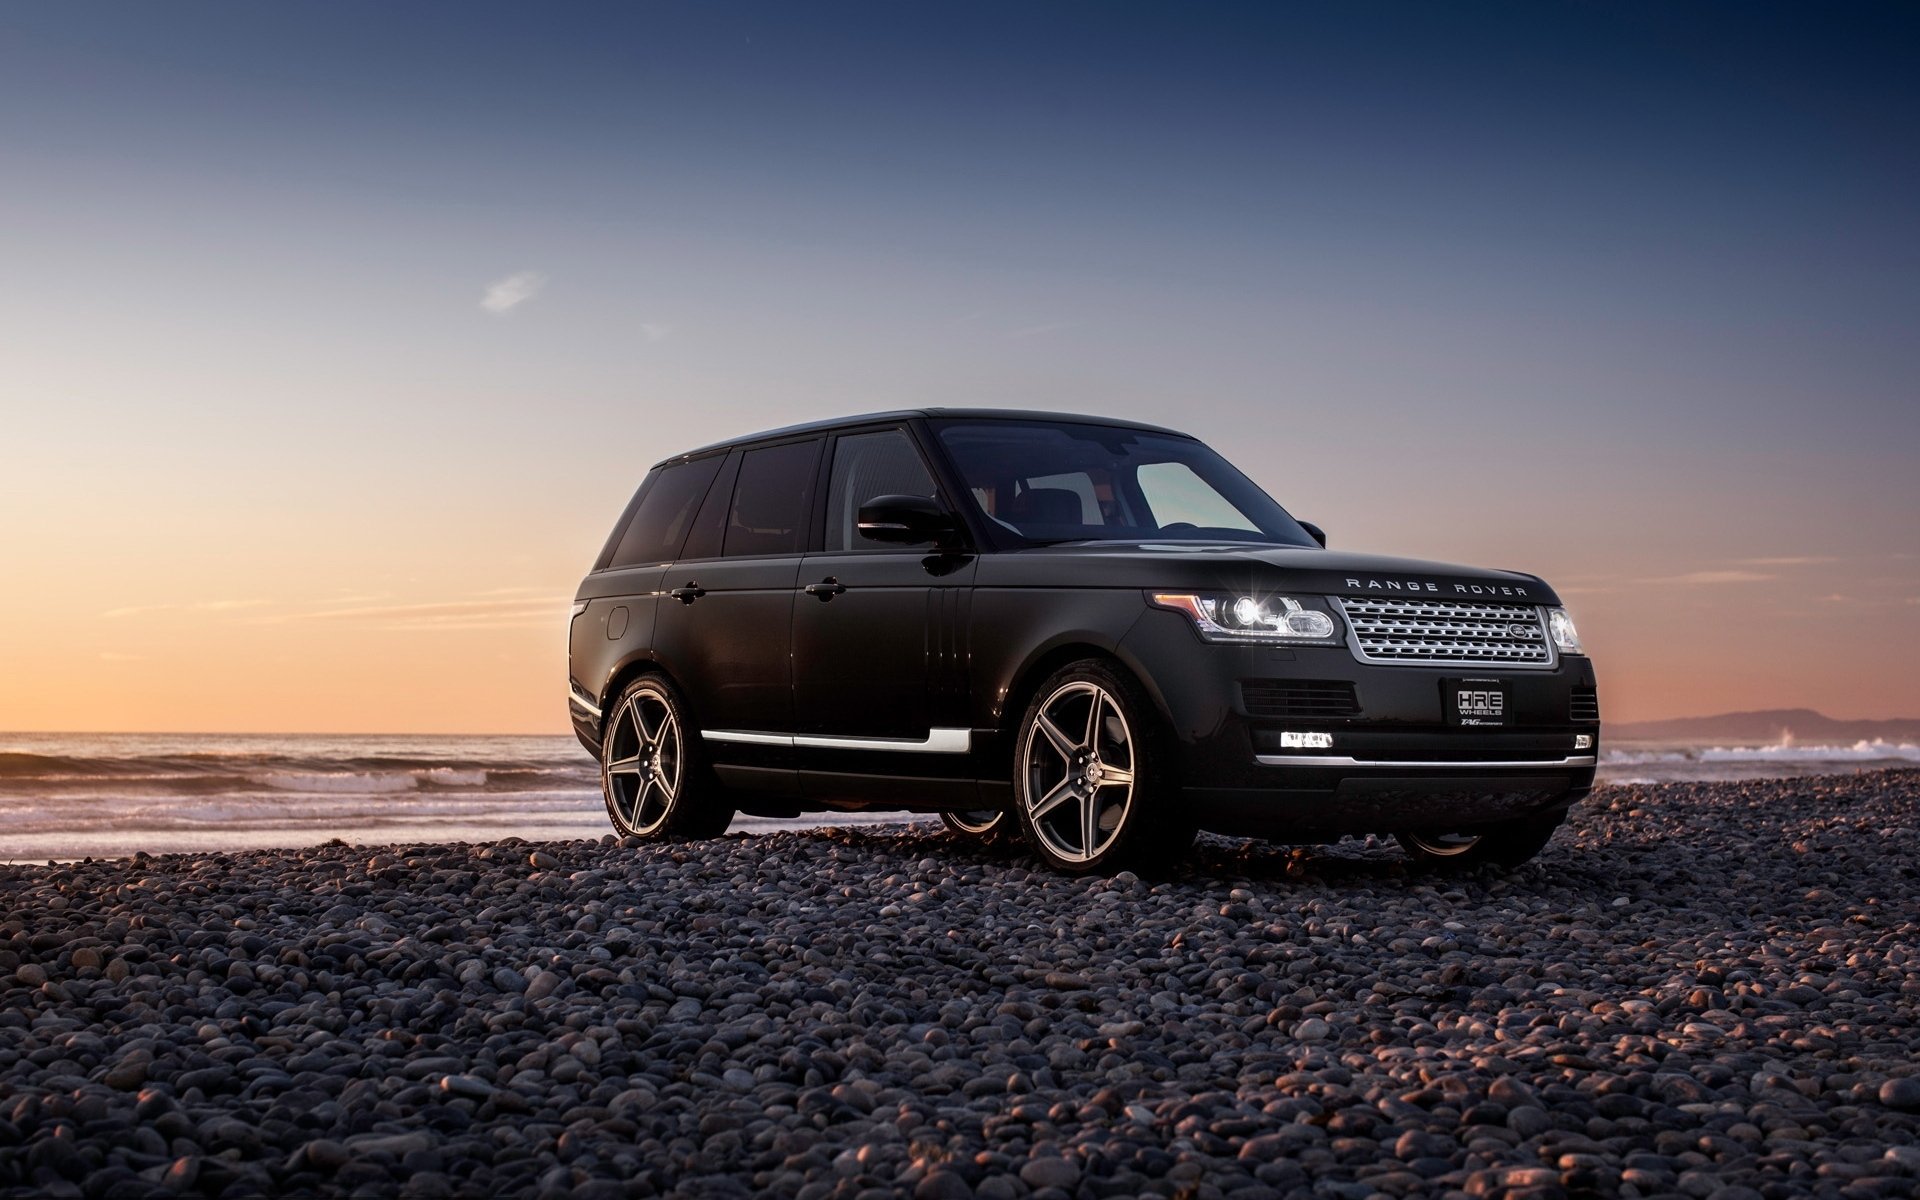 Range rover hd papers and backgrounds